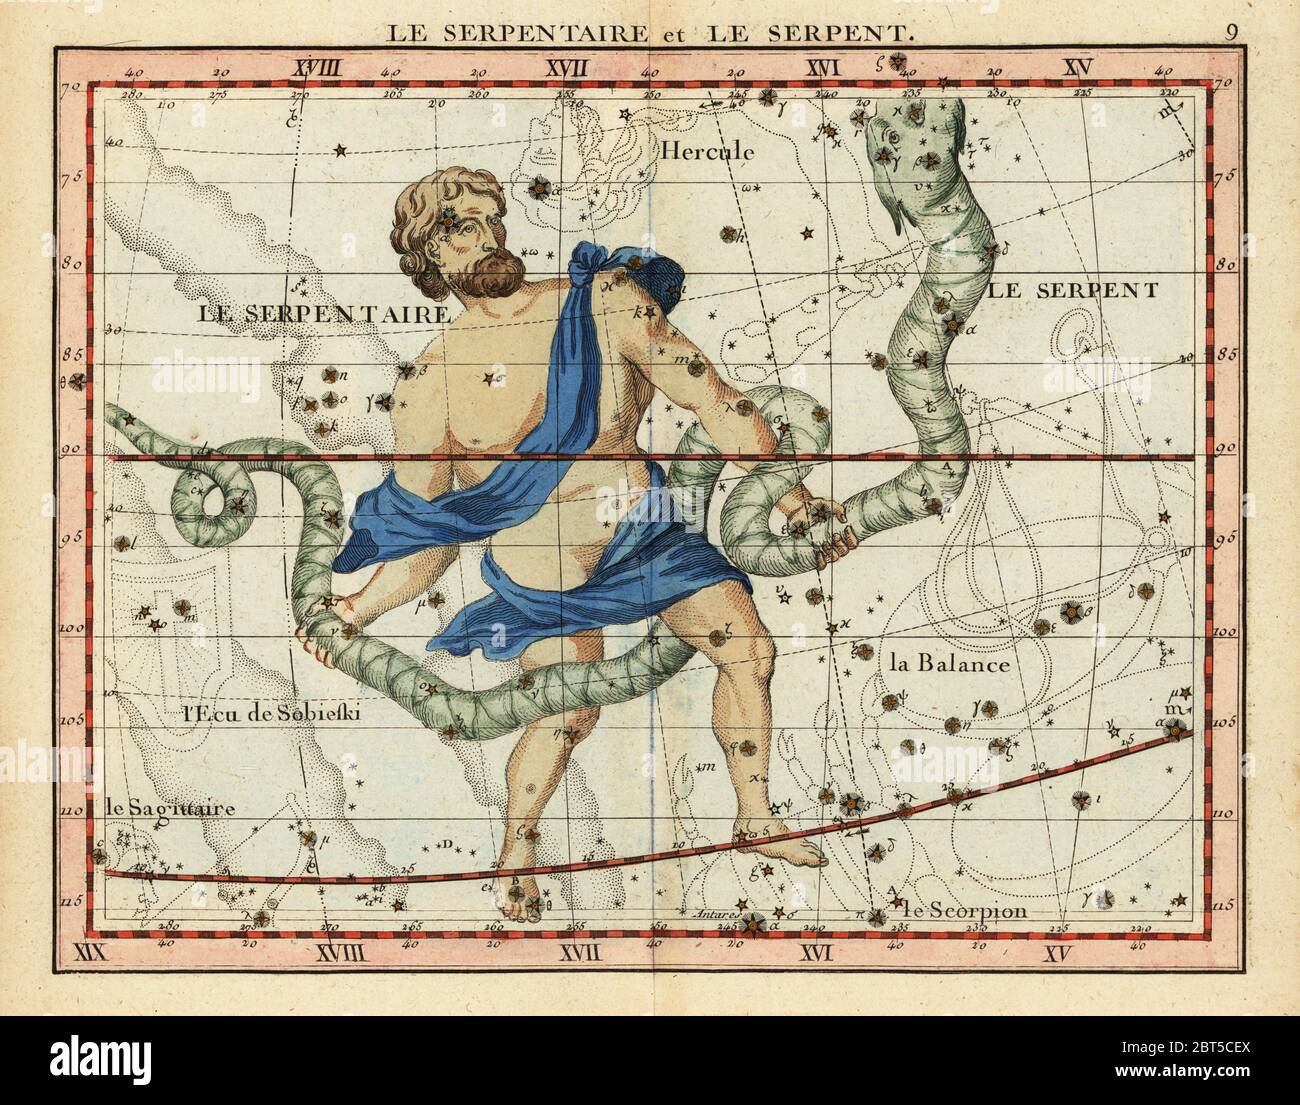 Constellations Ophiuchus and Serpens, with Hercules, Libra, Scorpius, and Scutum. Le serpentaire et le serpent.Handcoloured copperplate engraving from John Flamsteed and Nicolas Fortins Celestial Atlas or Atlas Celeste de Flamsteed, Lalande, Paris, 1795. Stock Photo